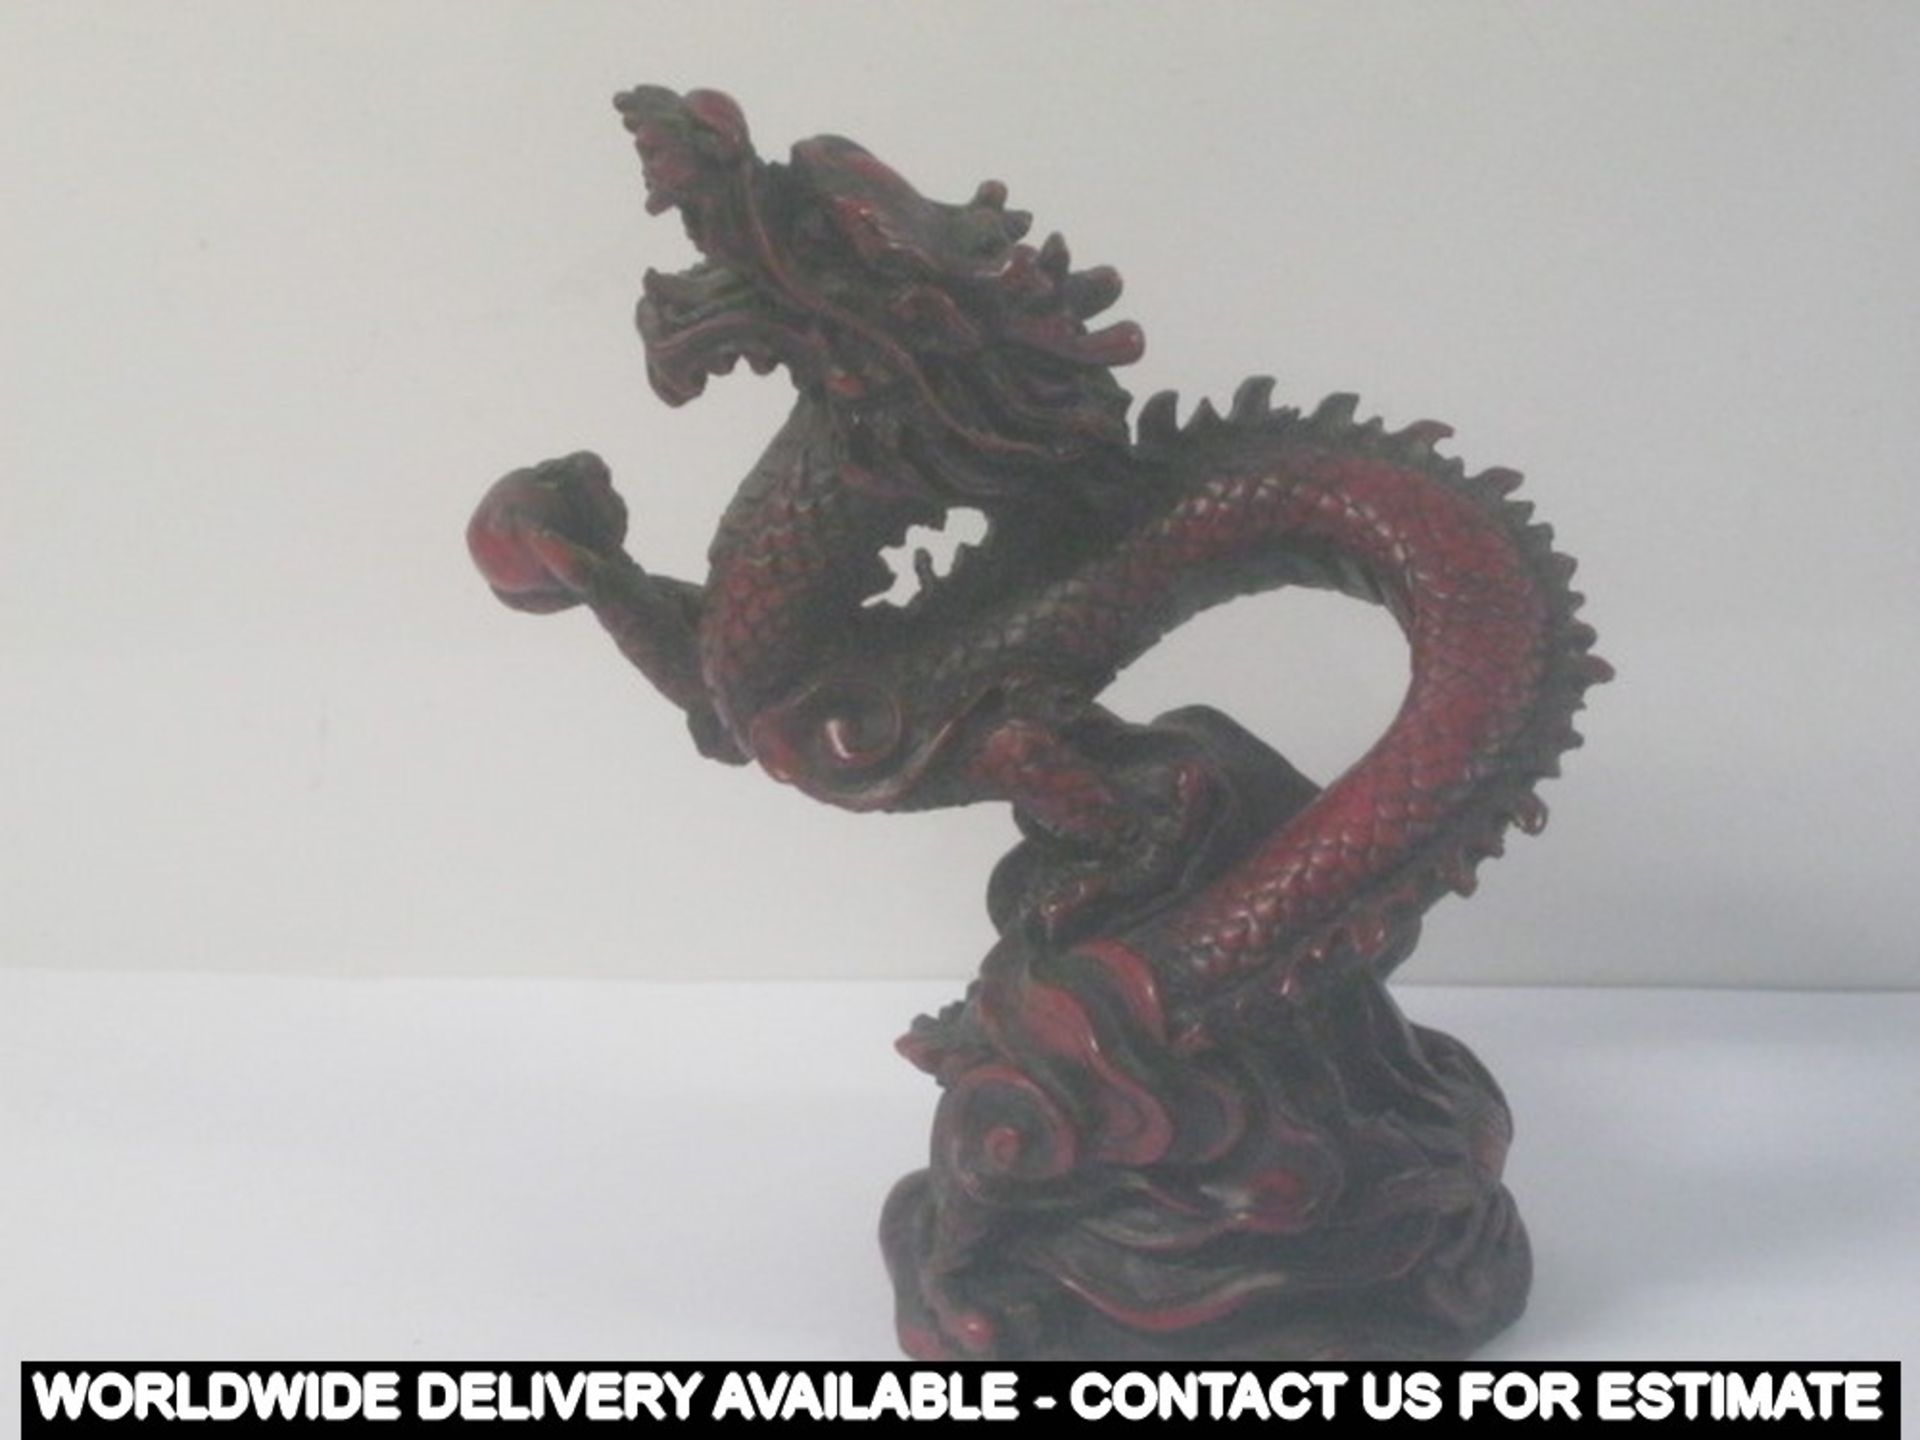 2 x red resin dragons - one marked SINGAPORE and MERLION - Image 4 of 5